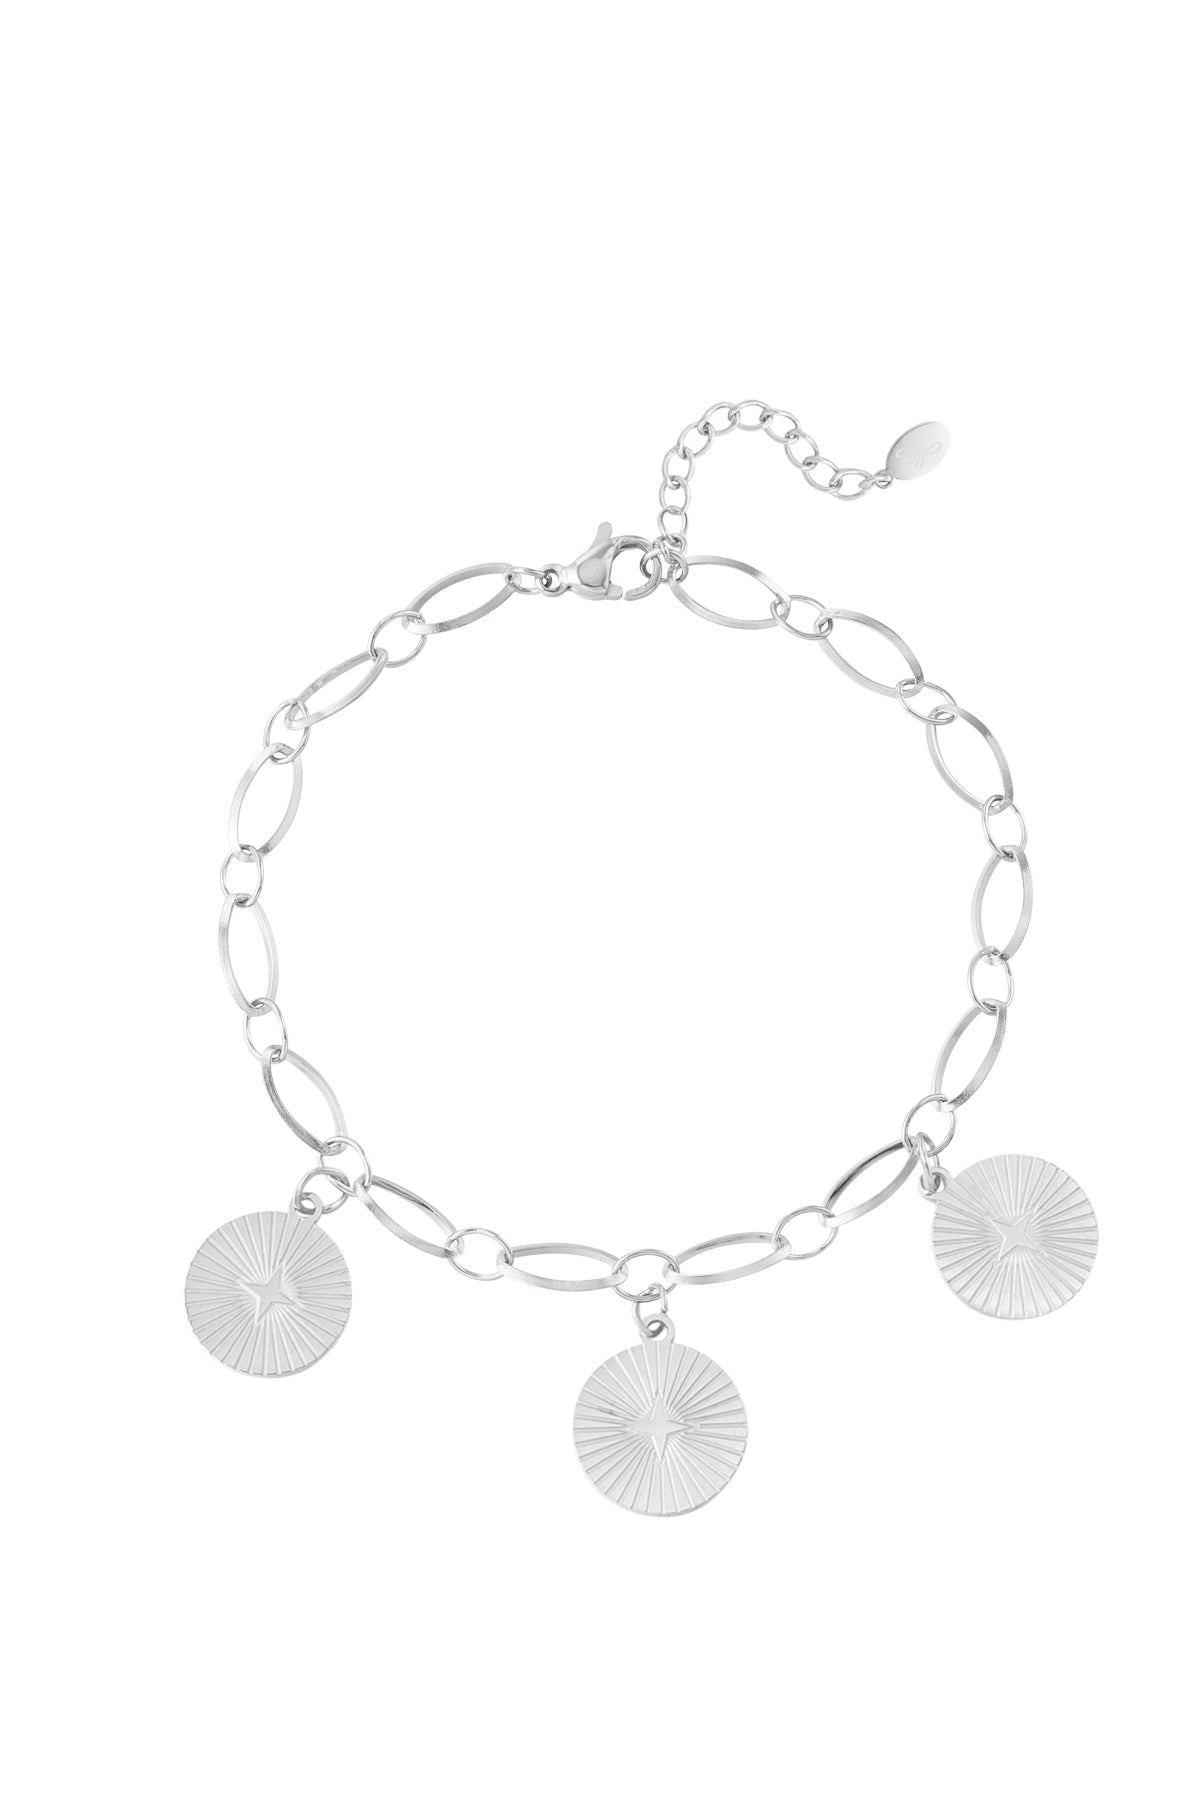 ♥︎3 COINS ARMBAND ZILVER - My Favourites